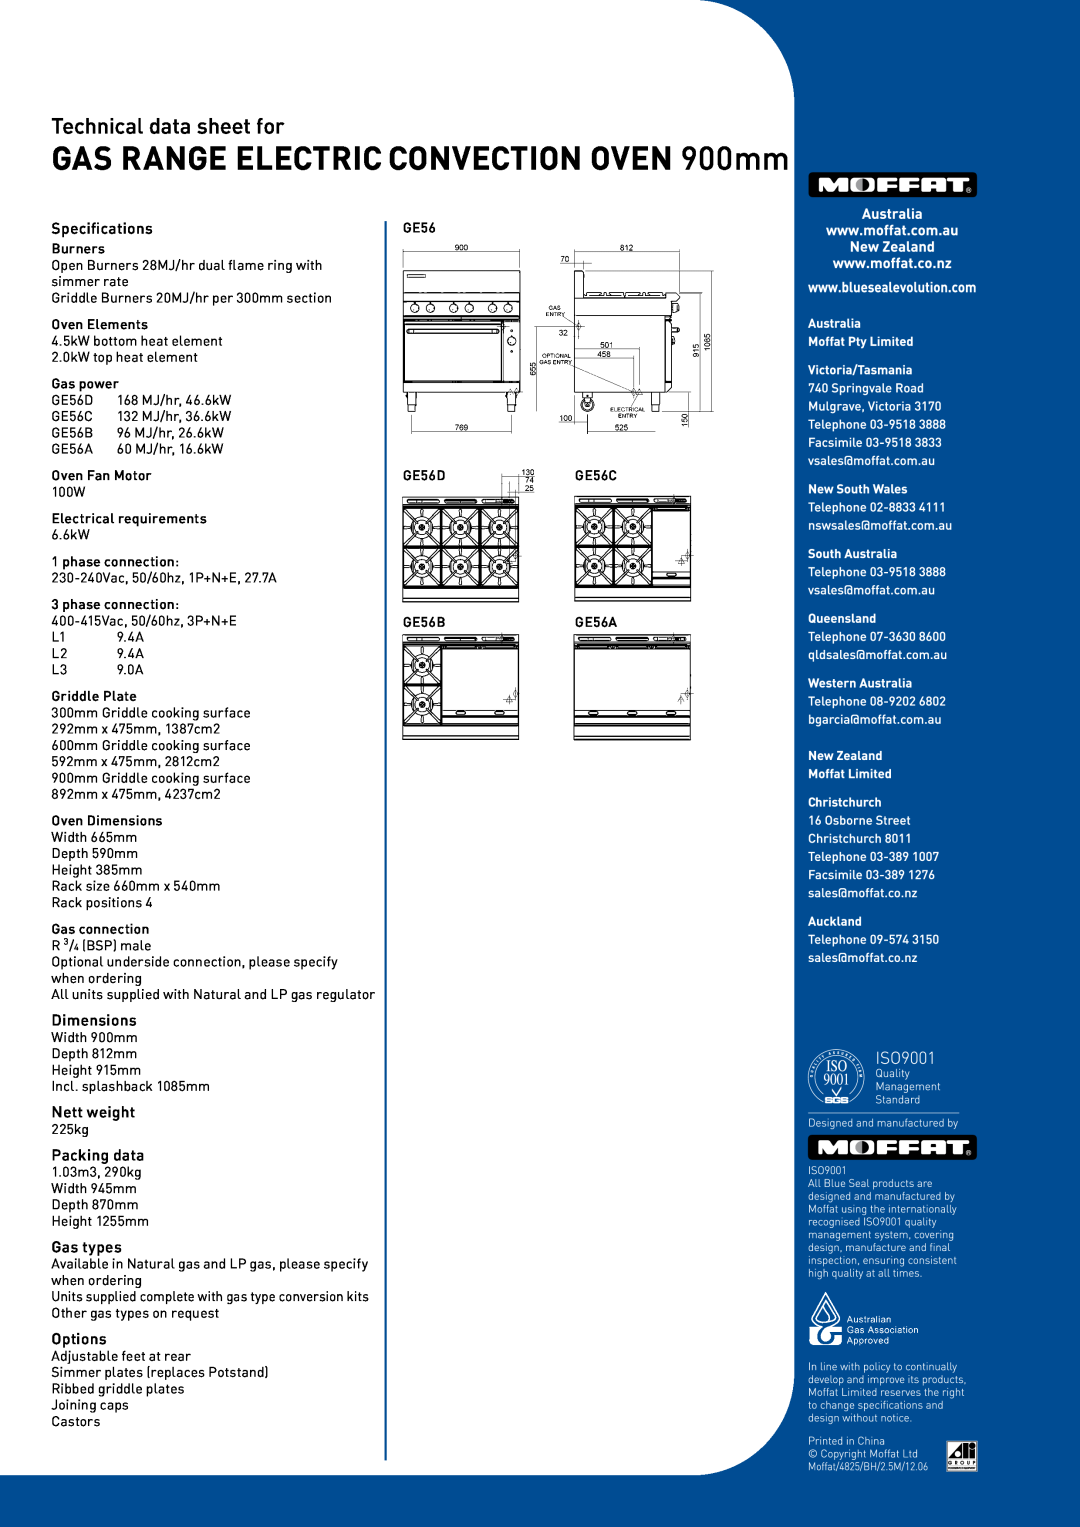 Moffat GE56C, GE56D Specifications, Dimensions, Nett weight, Packing data, Gas types, Options, Technical data sheet for 